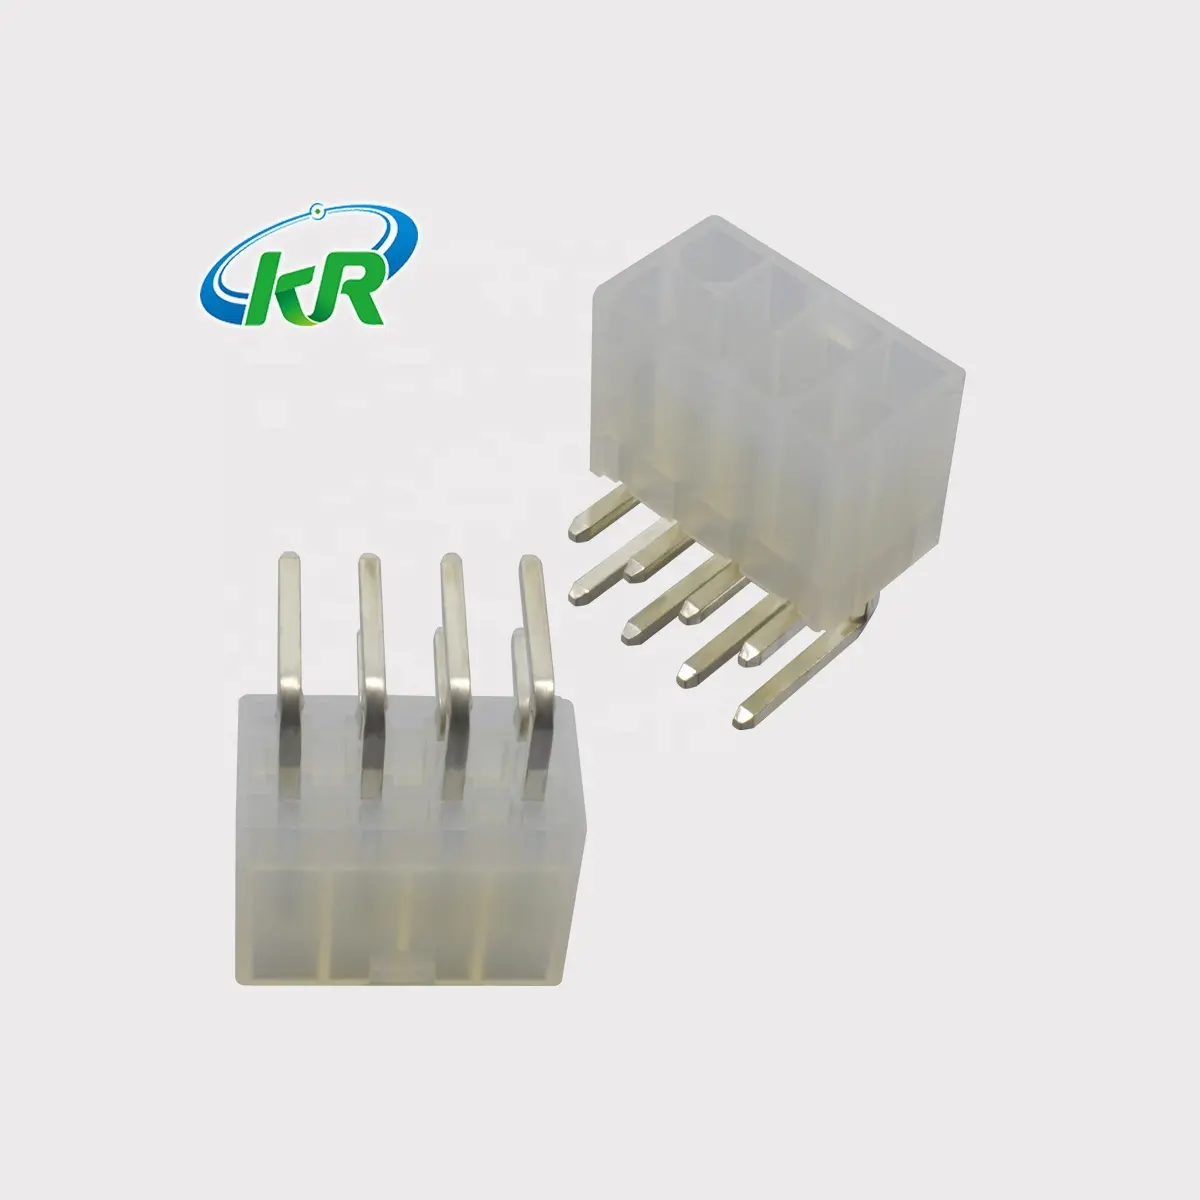 Wire To Board Connector Konnra KR4200 4.2mm Pitch Wire Harness Electronic Wire To Board PCB DIP Connectors